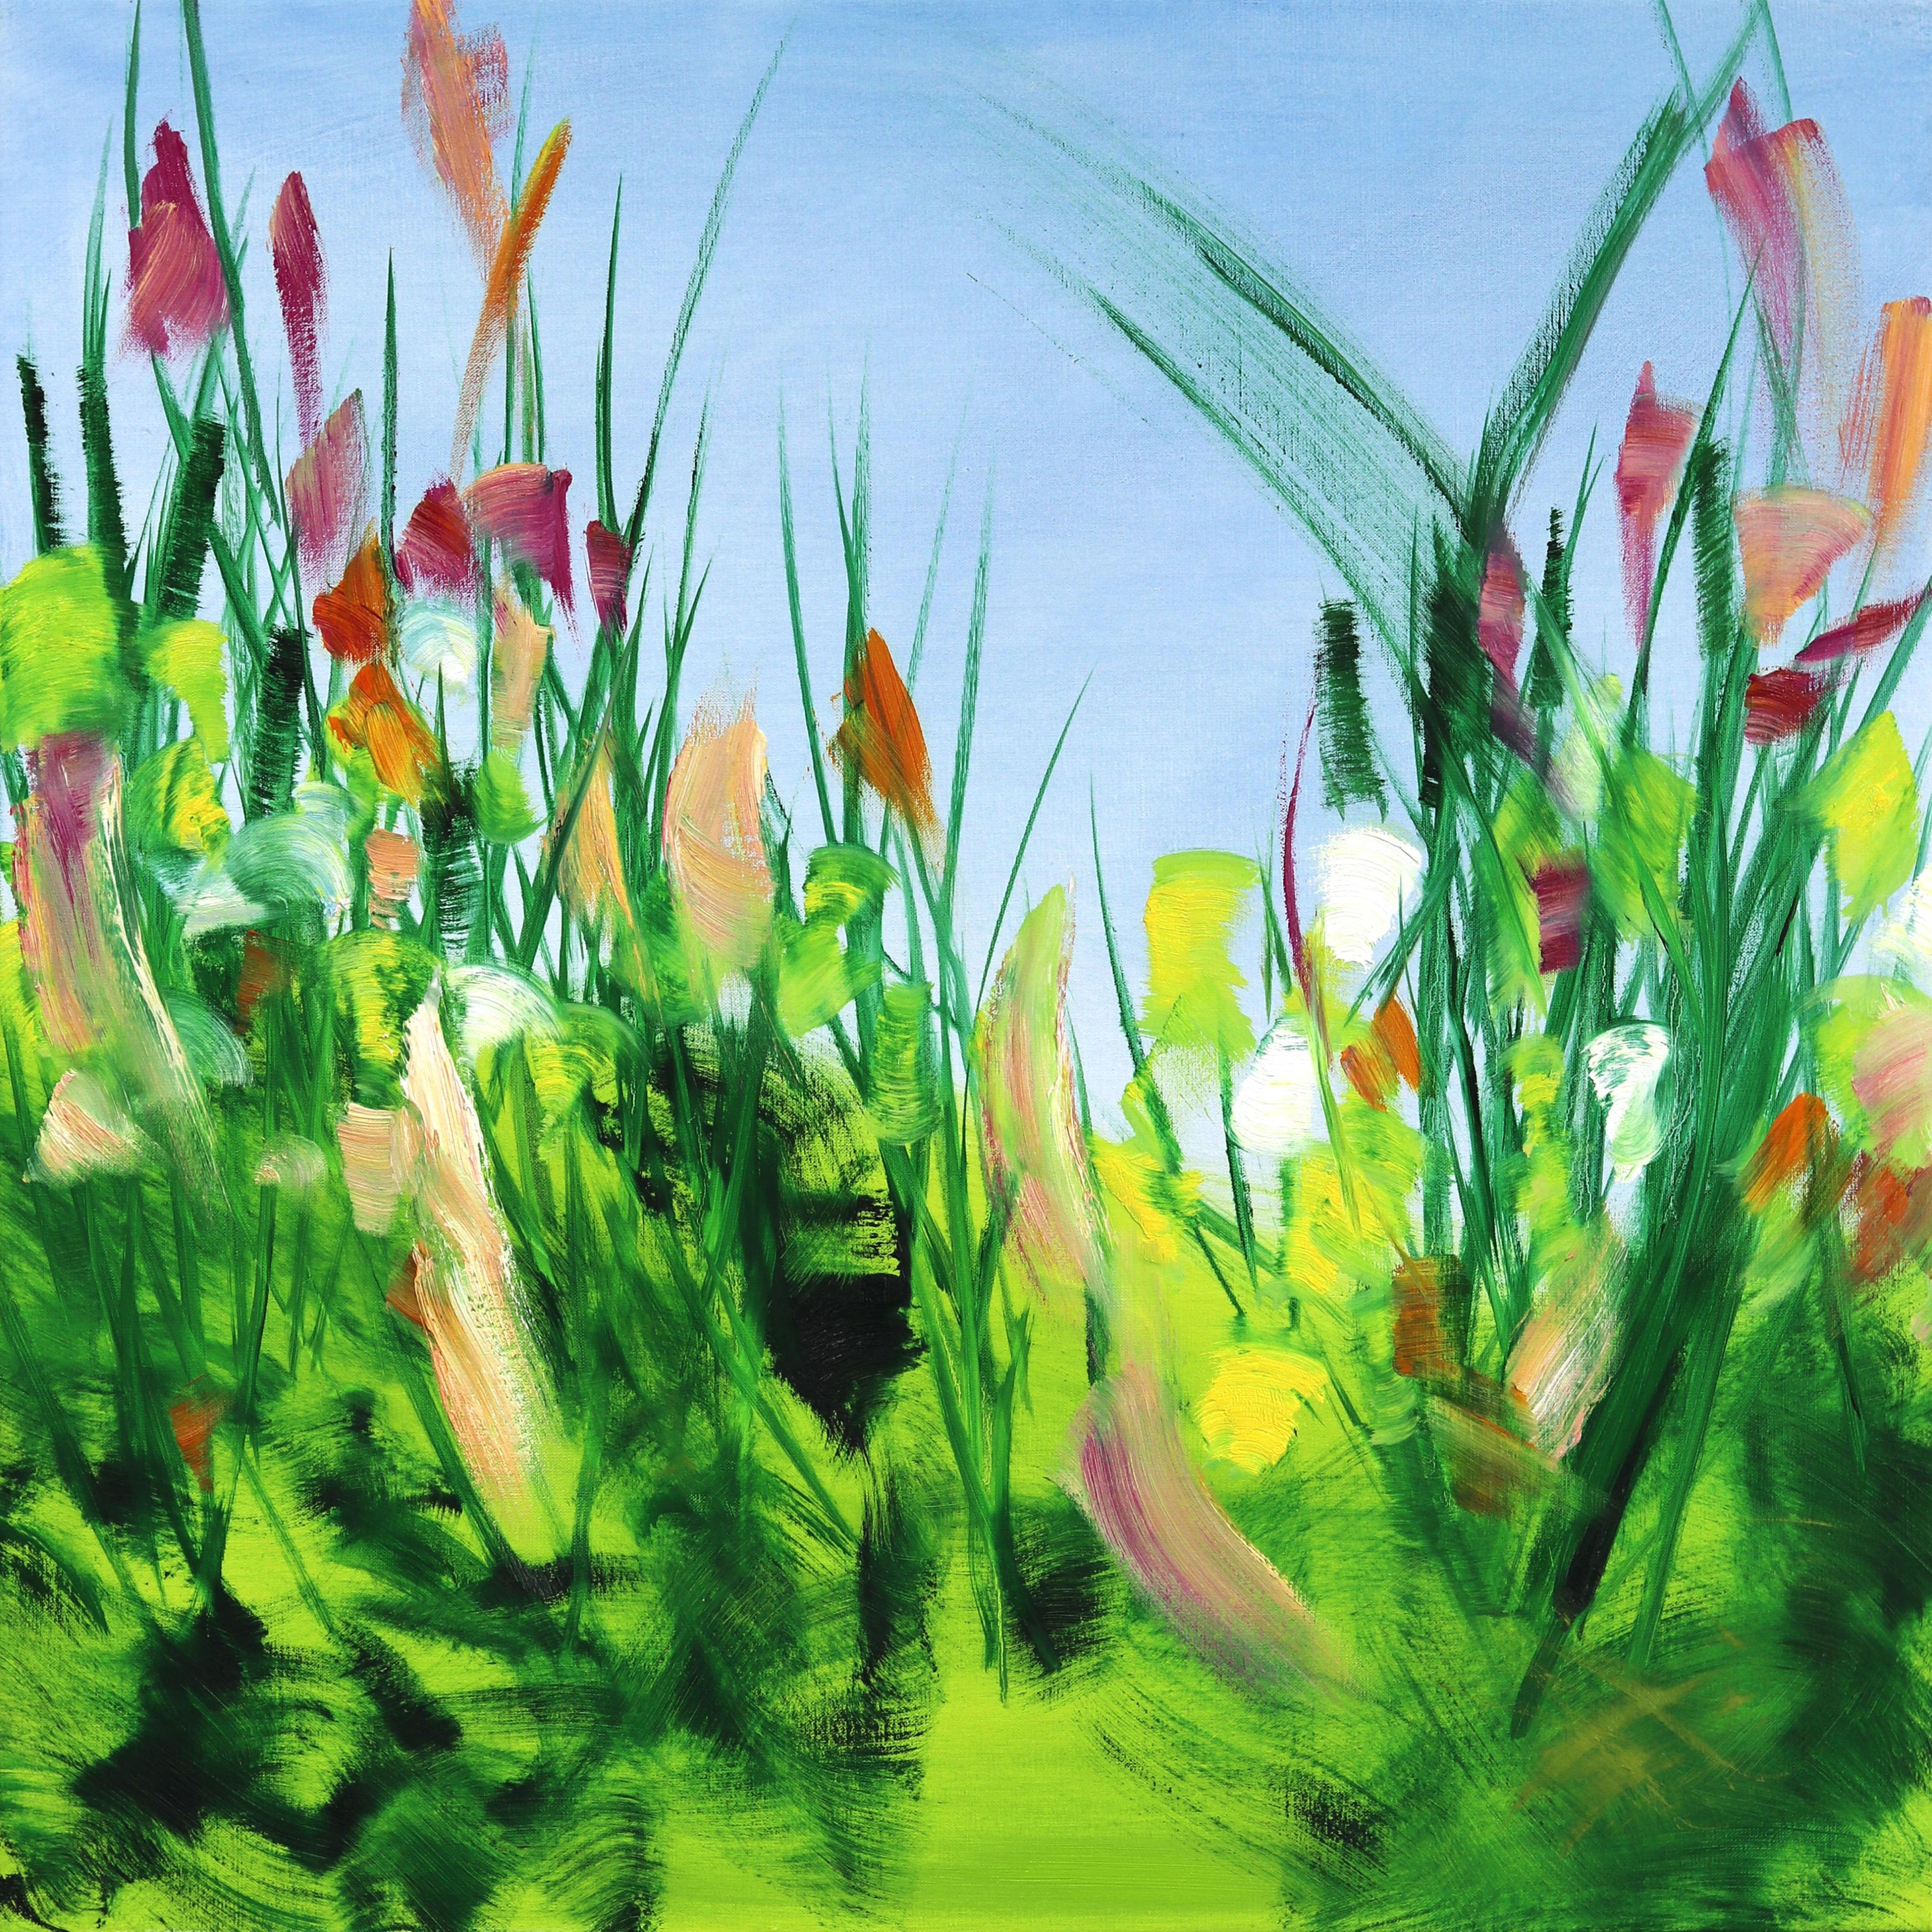 Bettina Mauel Landscape Painting - Springpower II - Serene Contemporary Oil Painting WildFlower Green Meadow Field